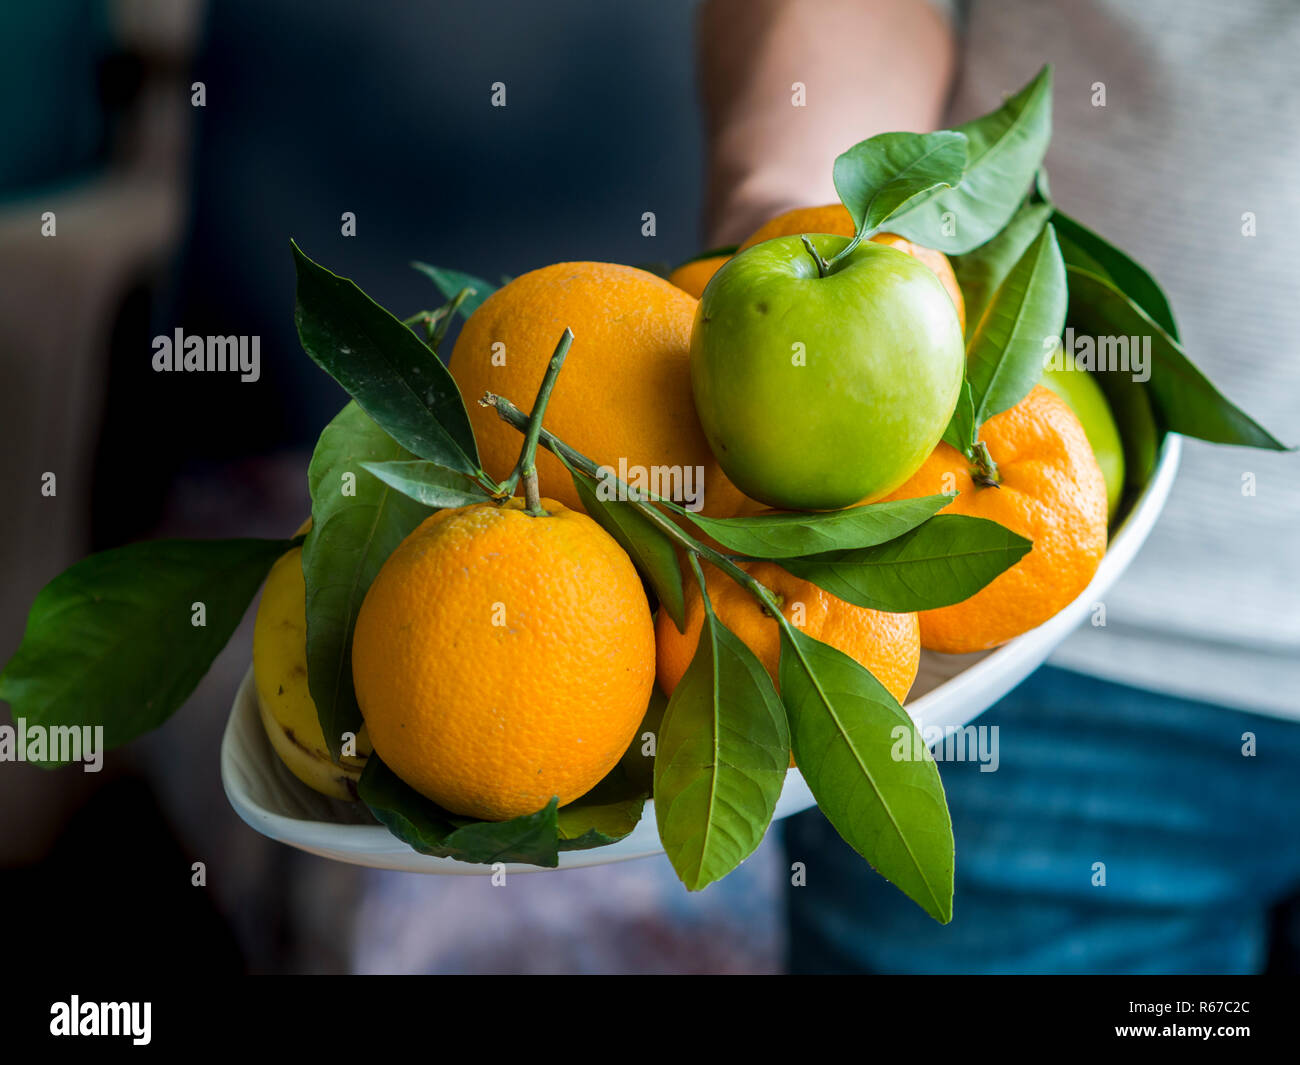 holding a fruit plate in his hands. Tangerine, orange, apple and banana in white plate. Stock Photo